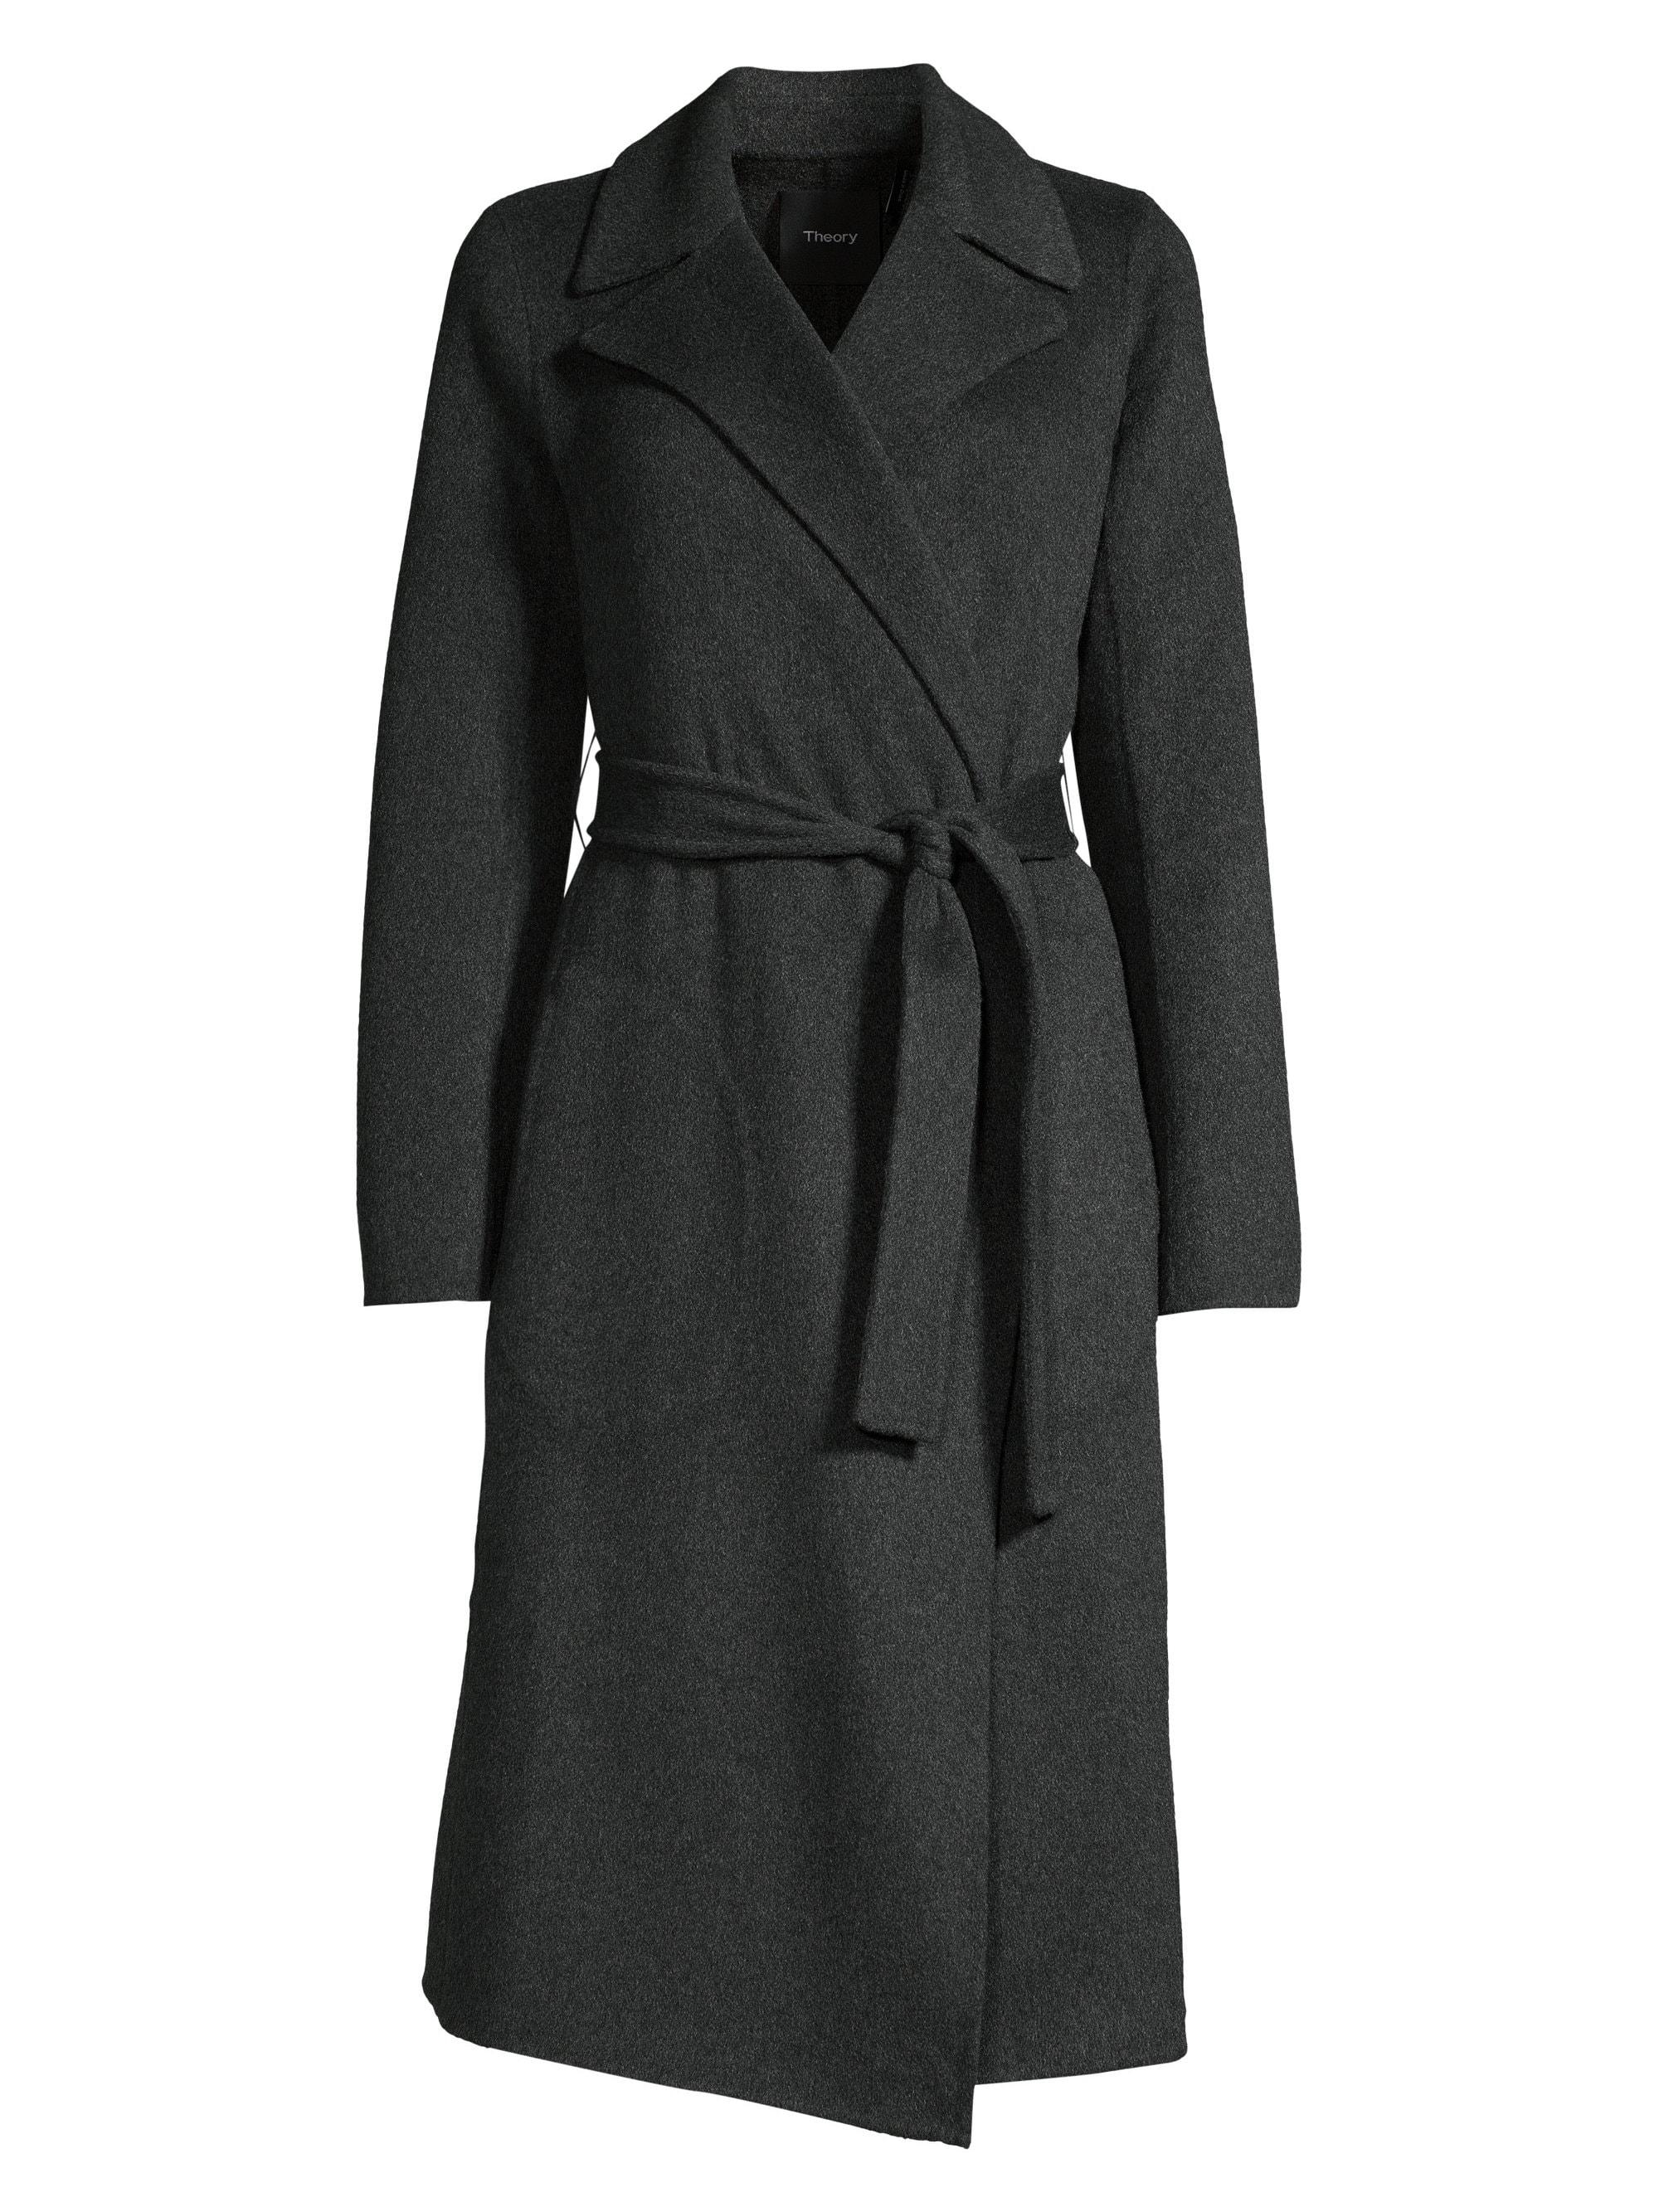 Theory Women's Tokyo Cashmere Wrap Trench Coat - Grey Melange in Gray ...